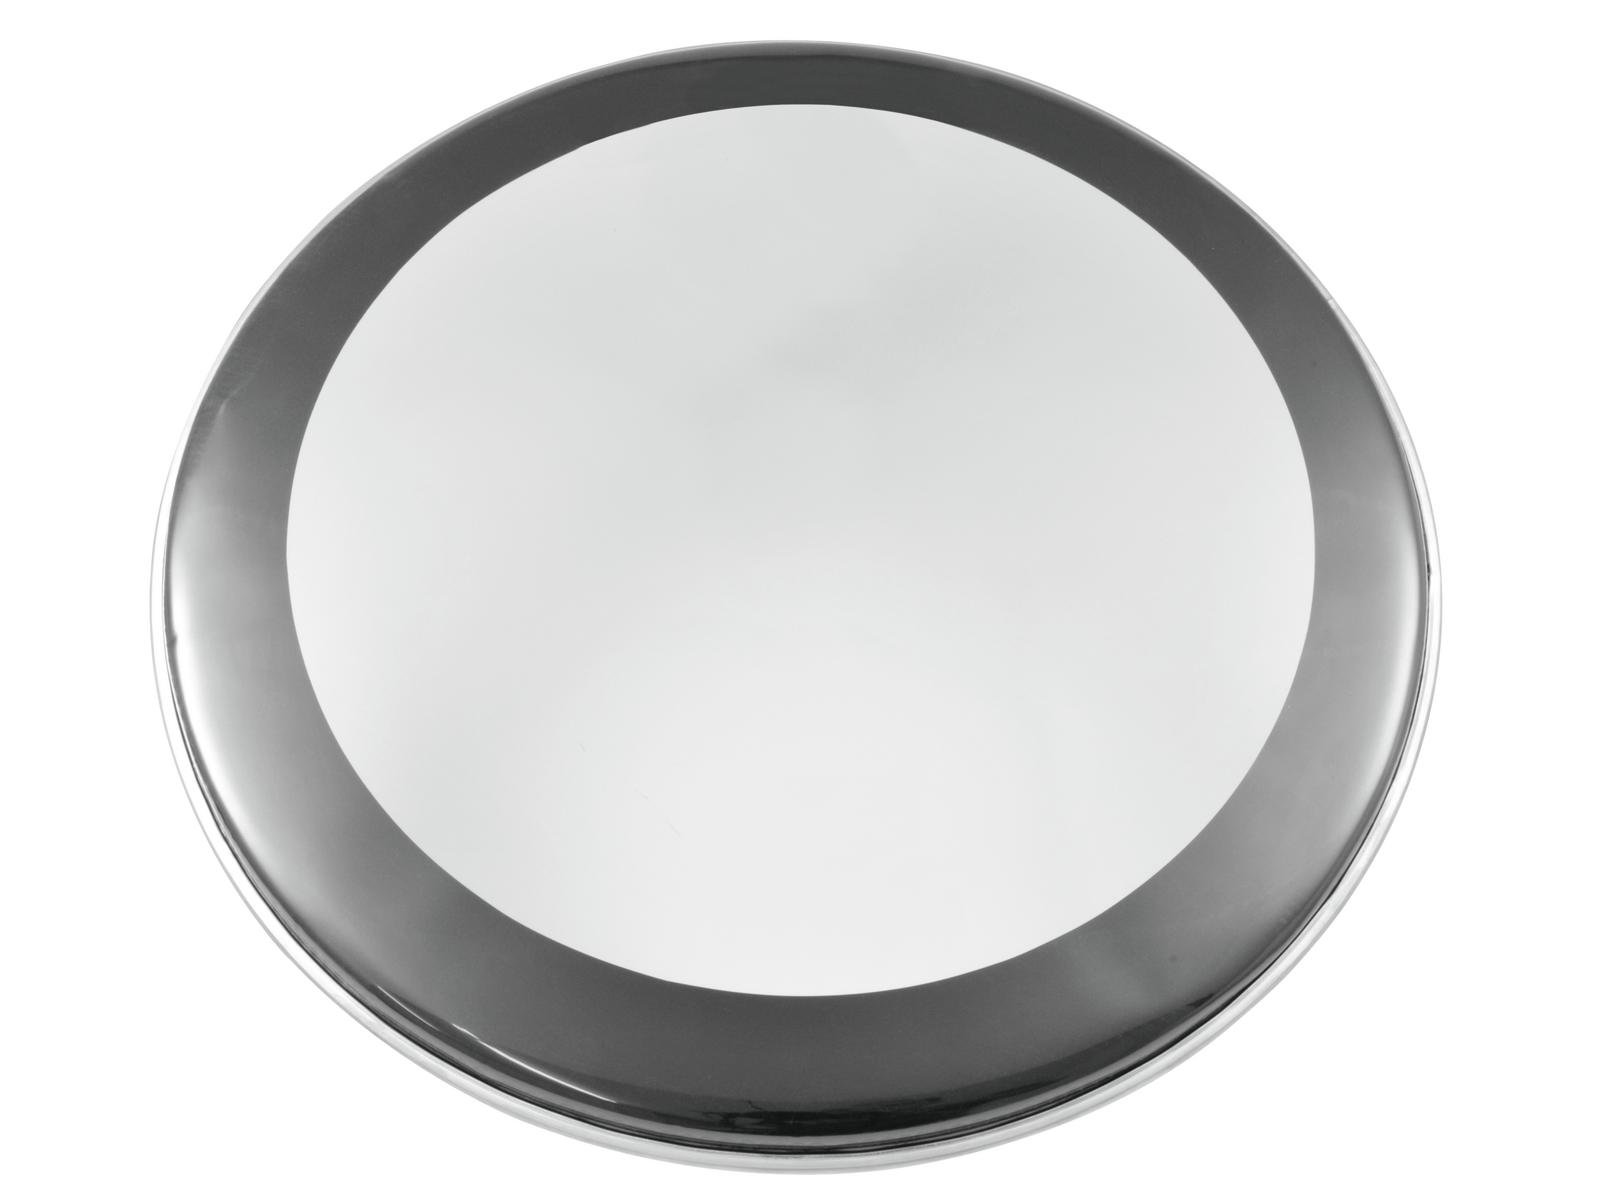 DIMAVERY DH-08 Drumhead, power ring